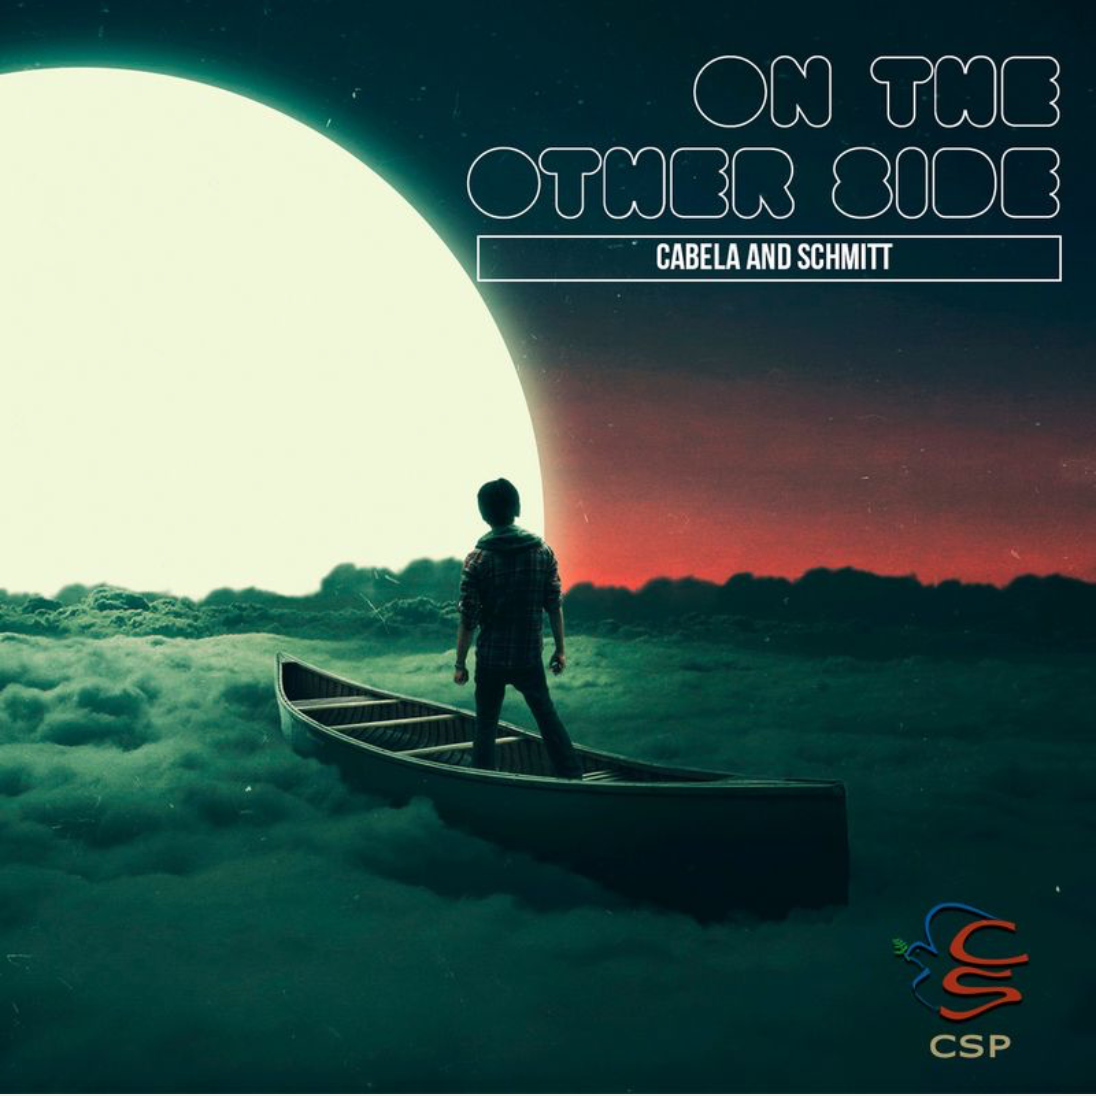 Latest single, ‘ON THE OTHER SIDE’ by Cabela and Schmitt showcases their versatility in blending various genres